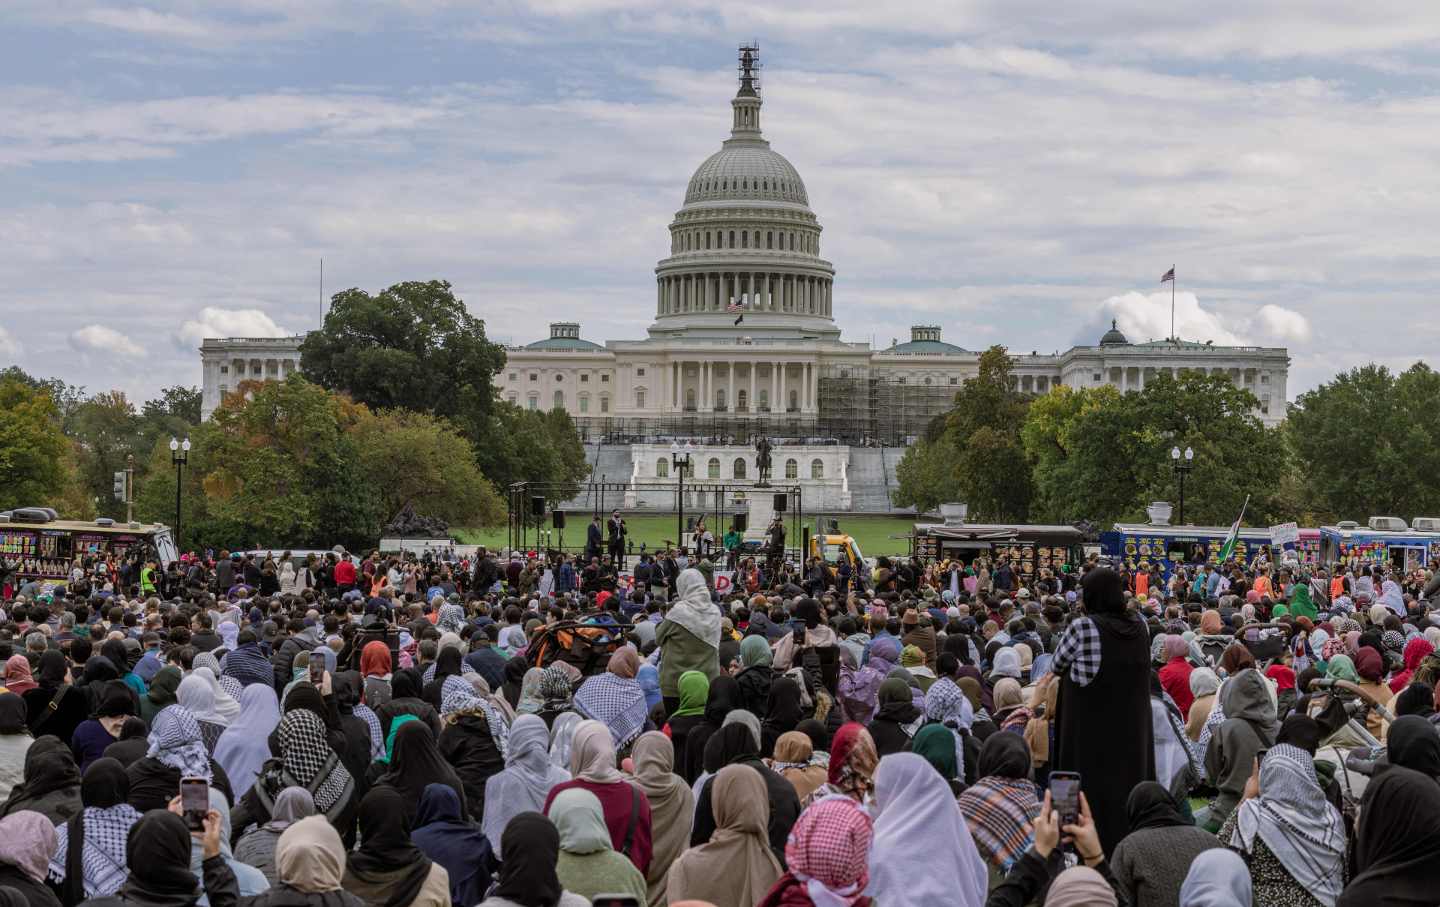 Muslims gather for Friday prayers in front of the Capitol Building in Washington D.C. and take part in a demonstration to express their solidarity with the Palestinian people.